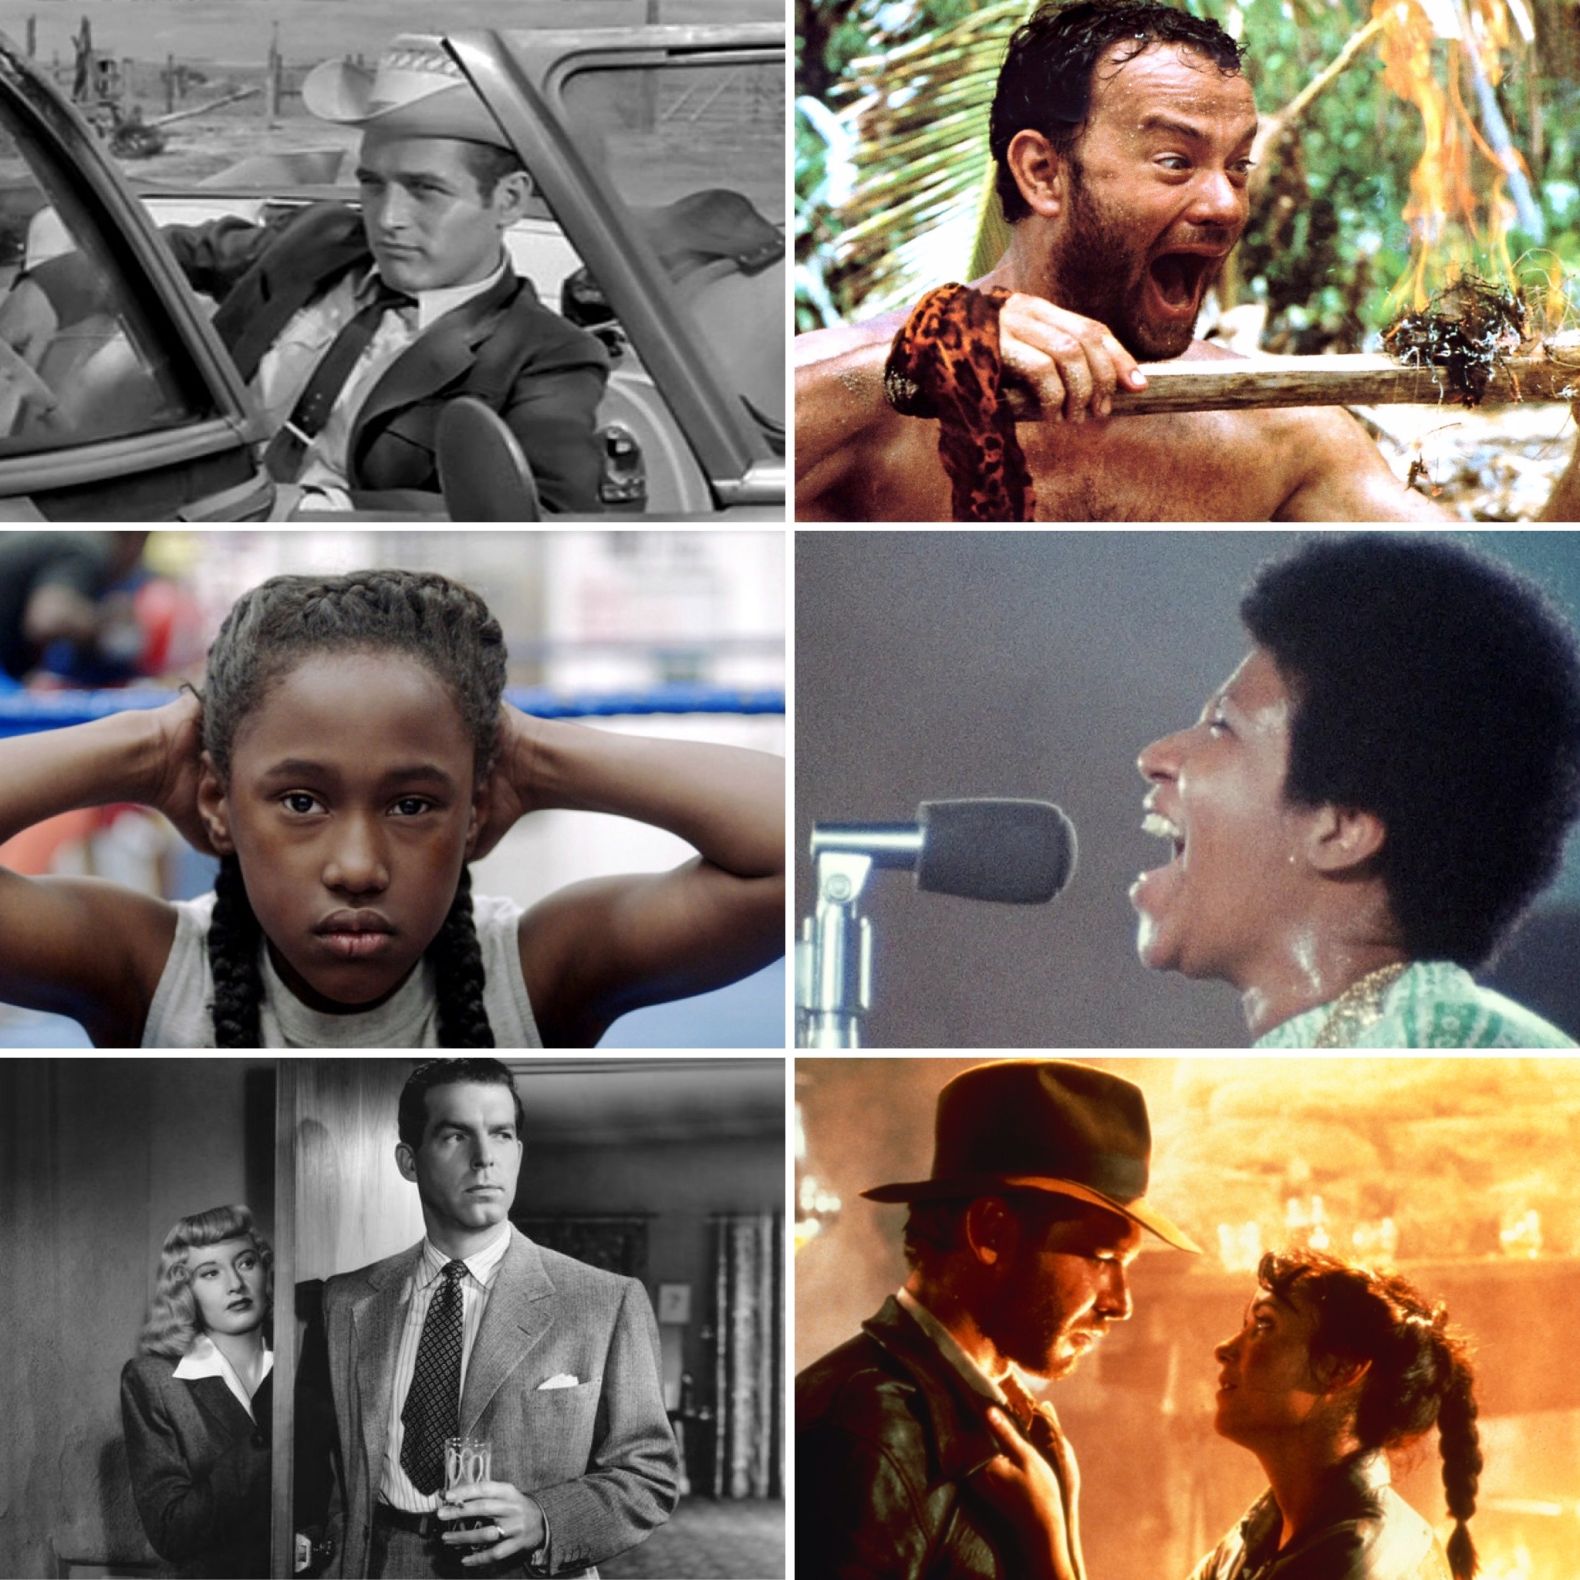 Duke Box #42: Our Guide to the Best Films on TV